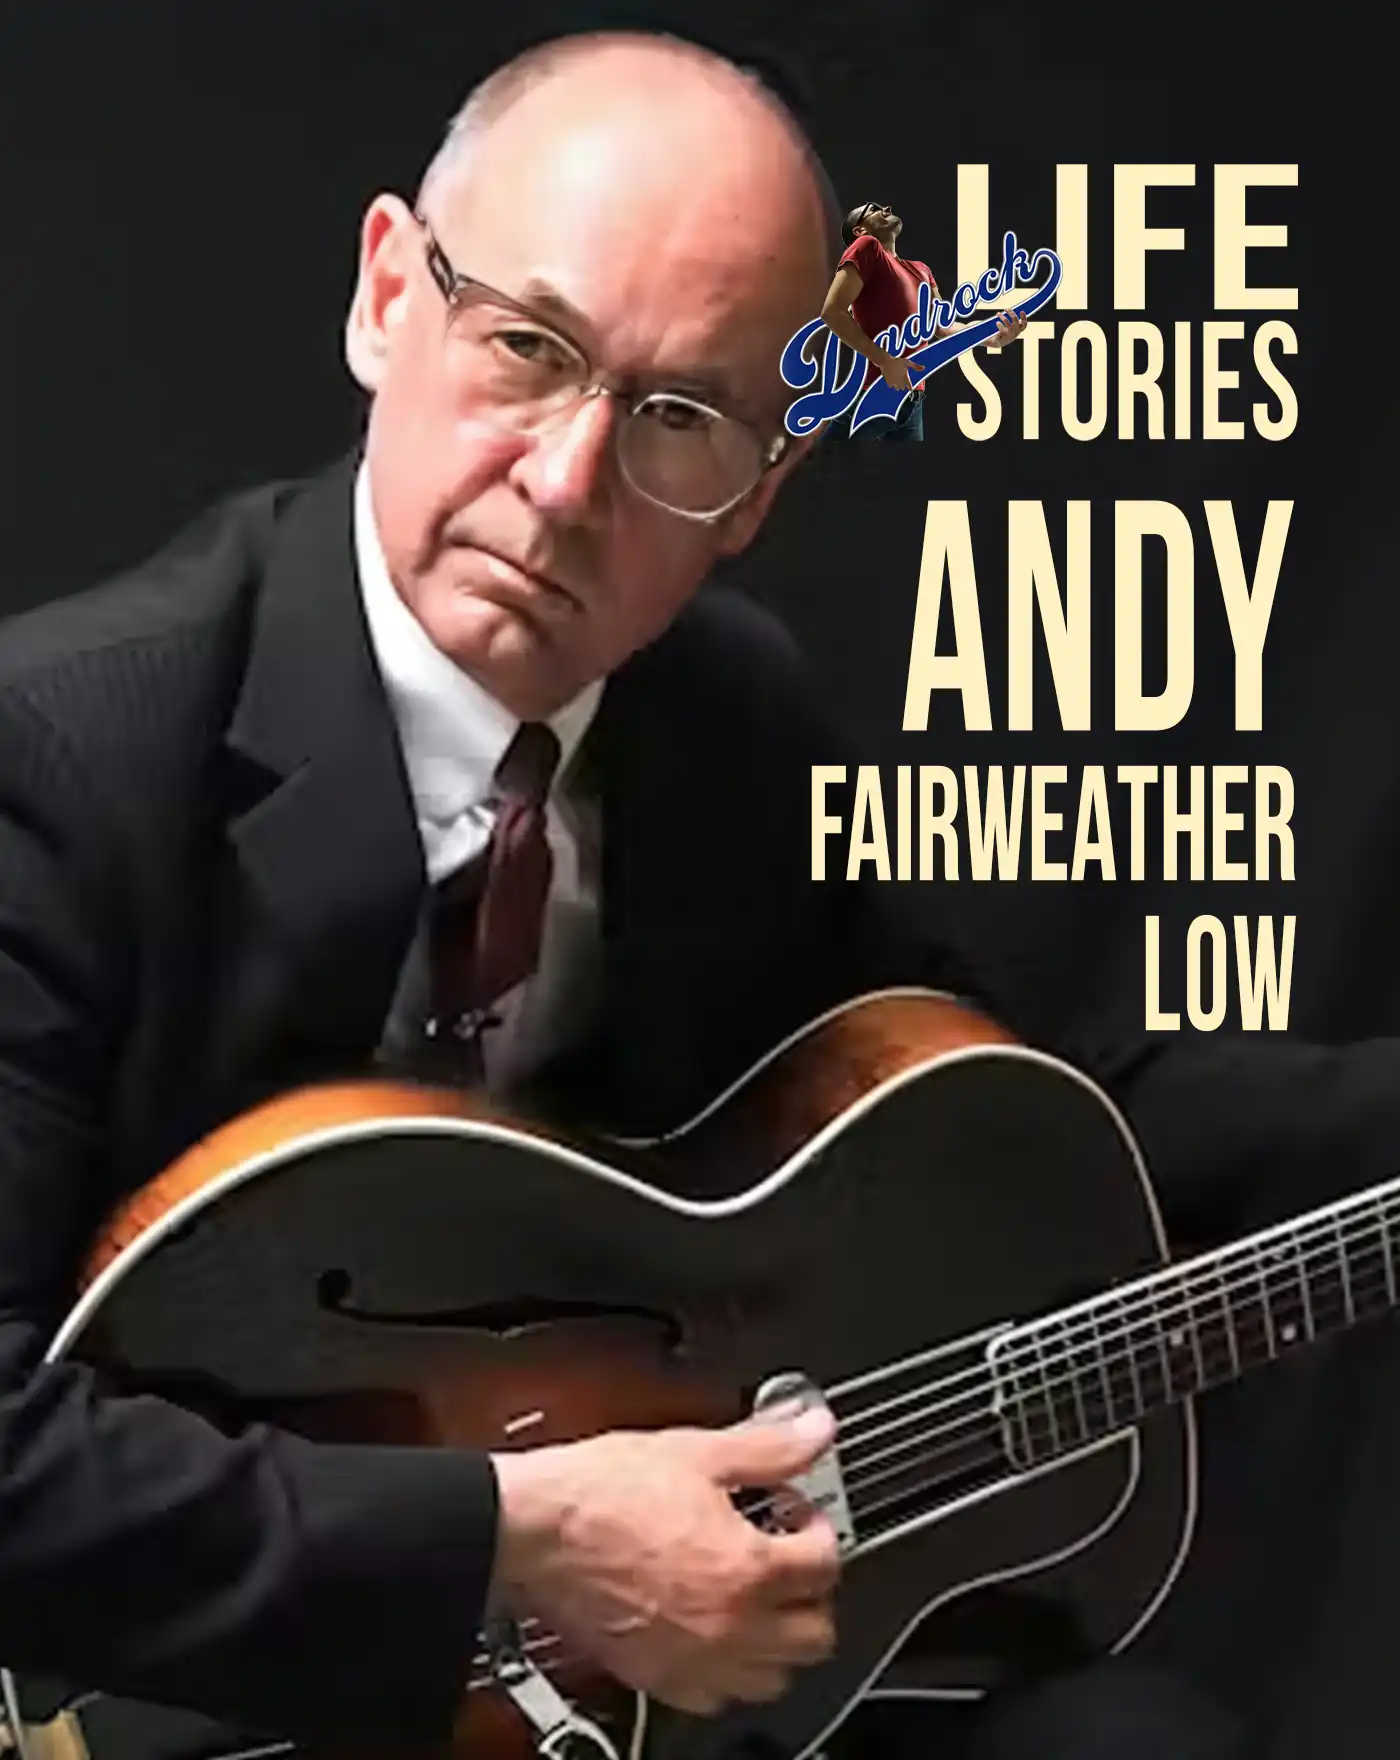 Episode Two - Andy Fairweather Low